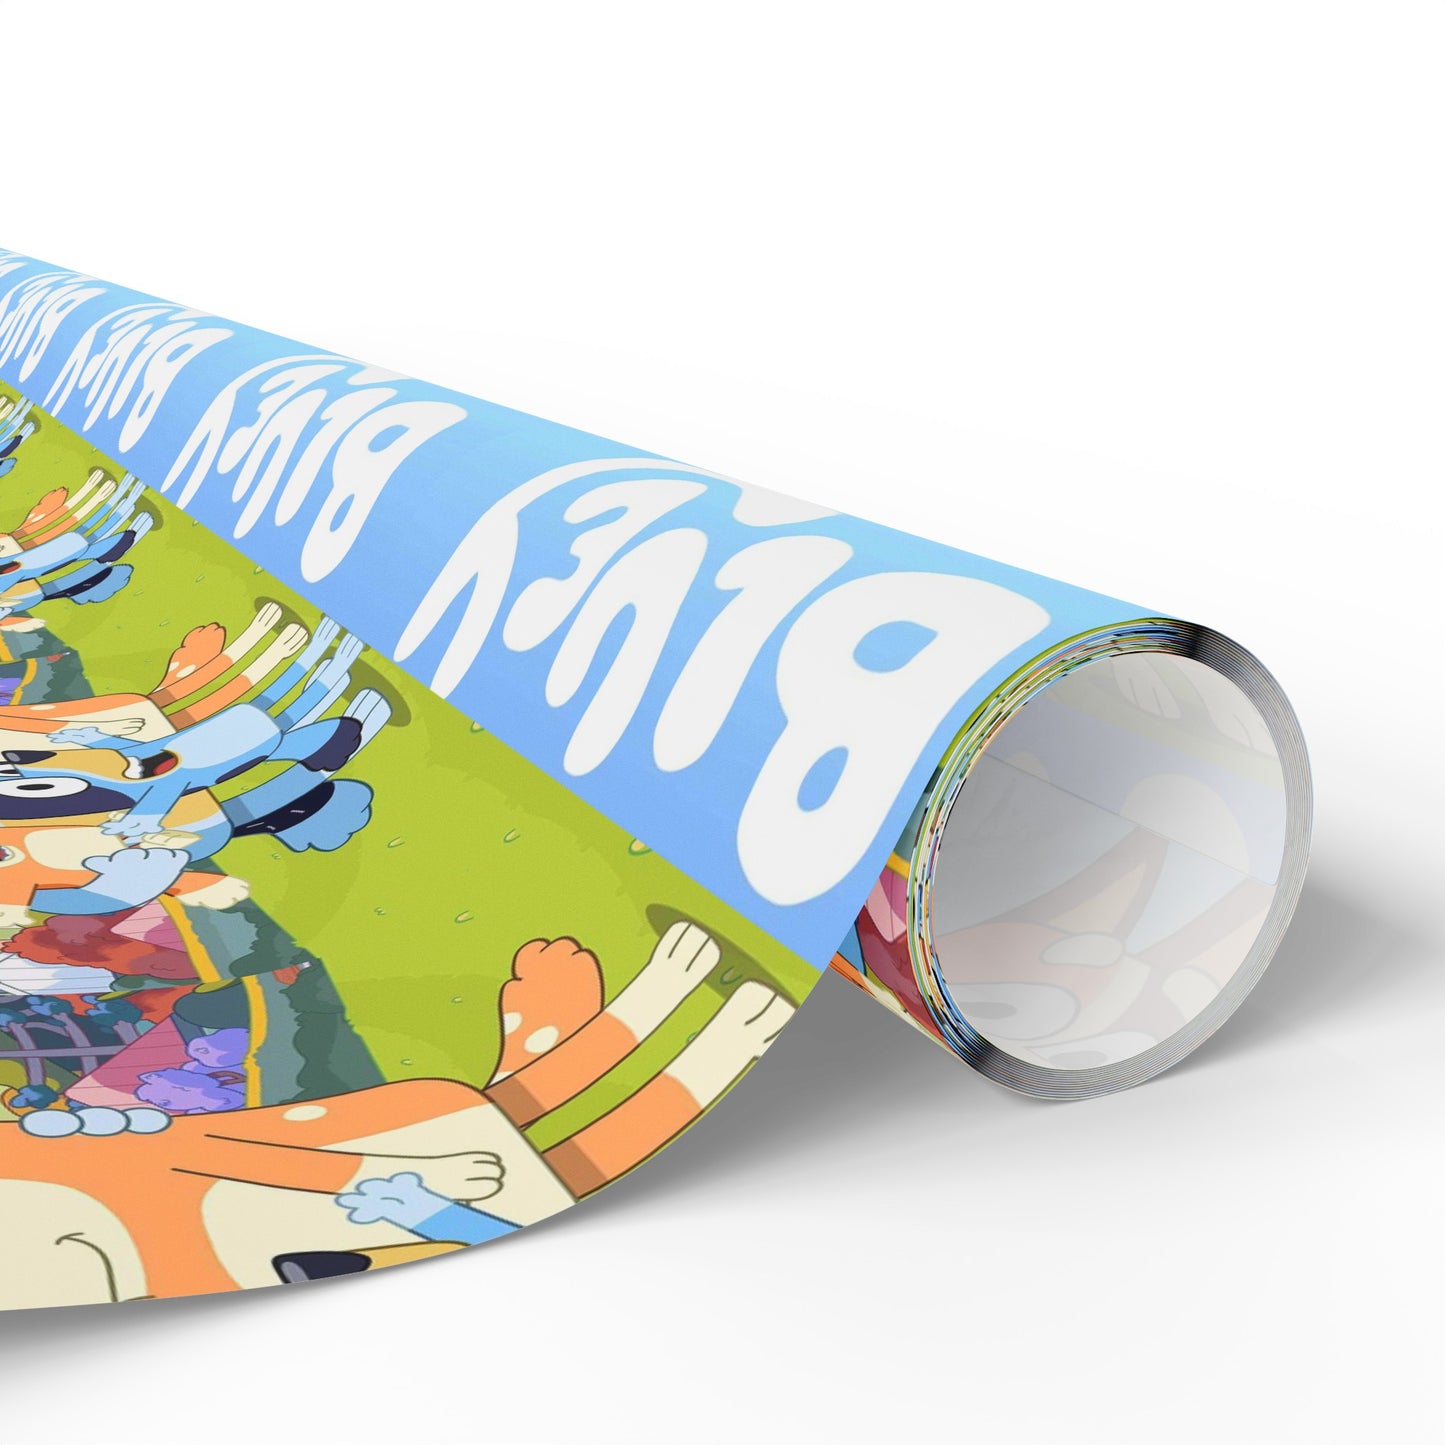 Bluey Childrens TV Show Cartoon Birthday High Def Gift Wrapping Paper